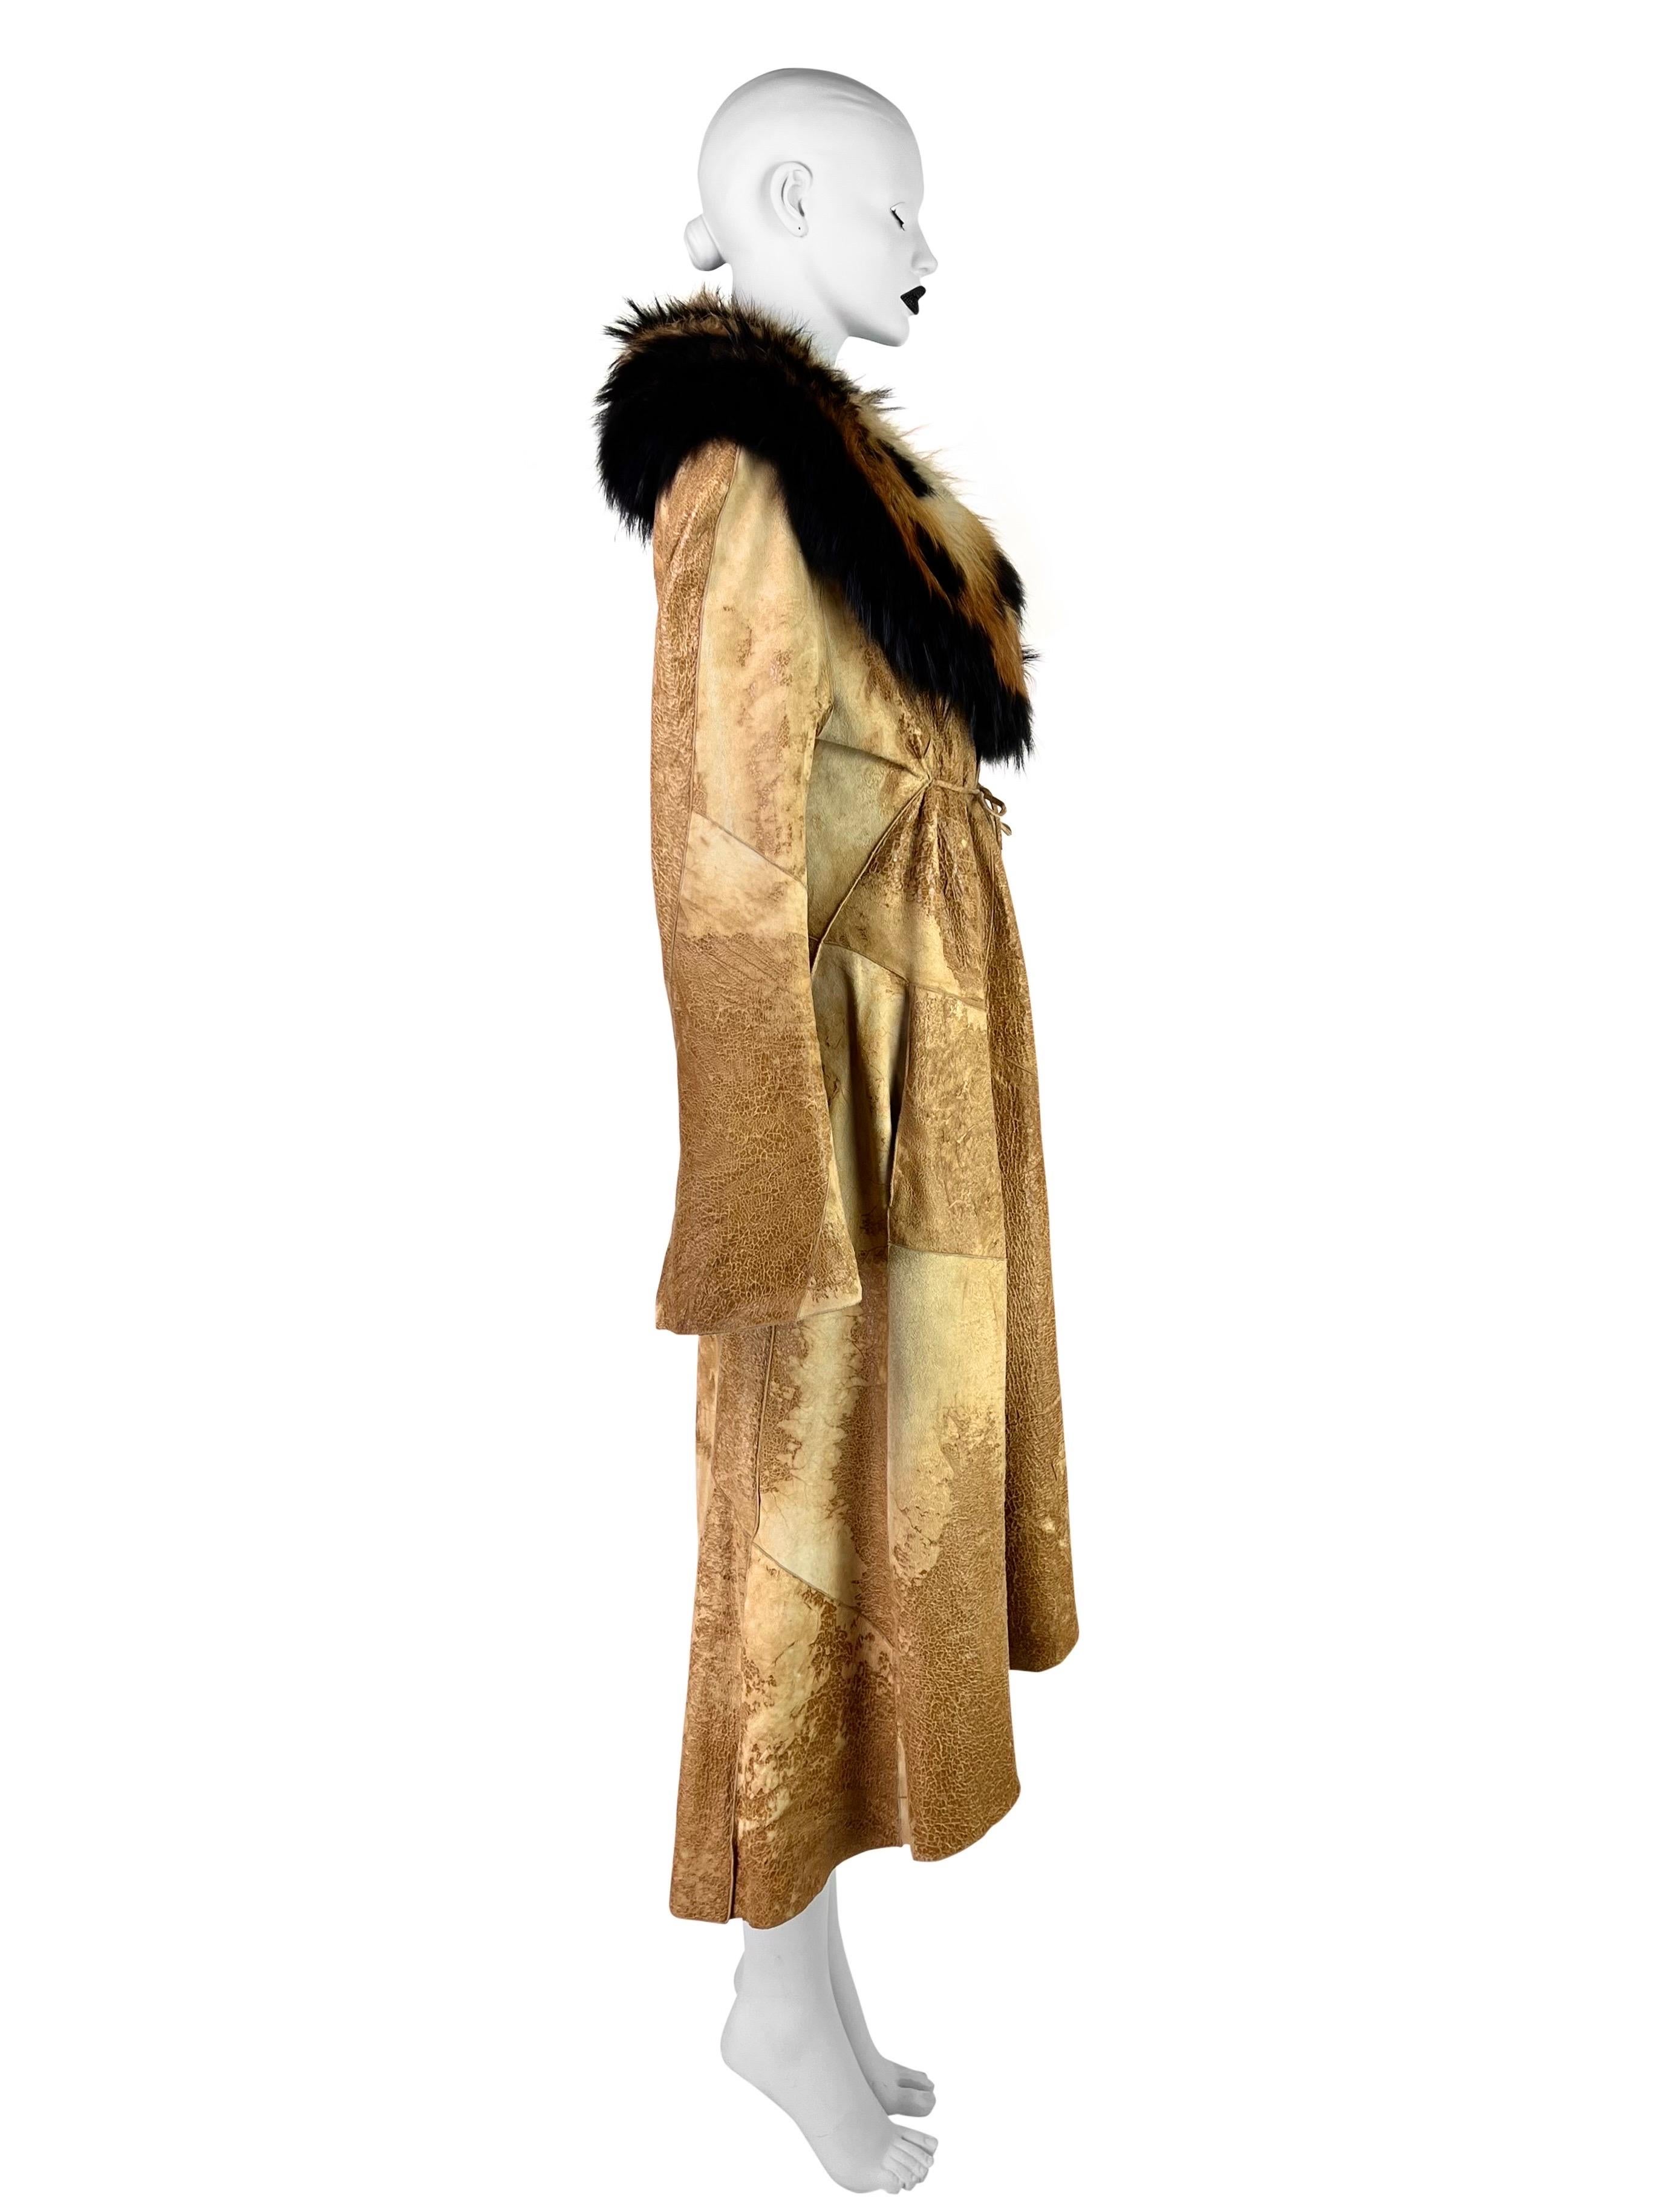 Roberto Cavalli Fall 2002 Leather Coat with Fox Fur For Sale 4